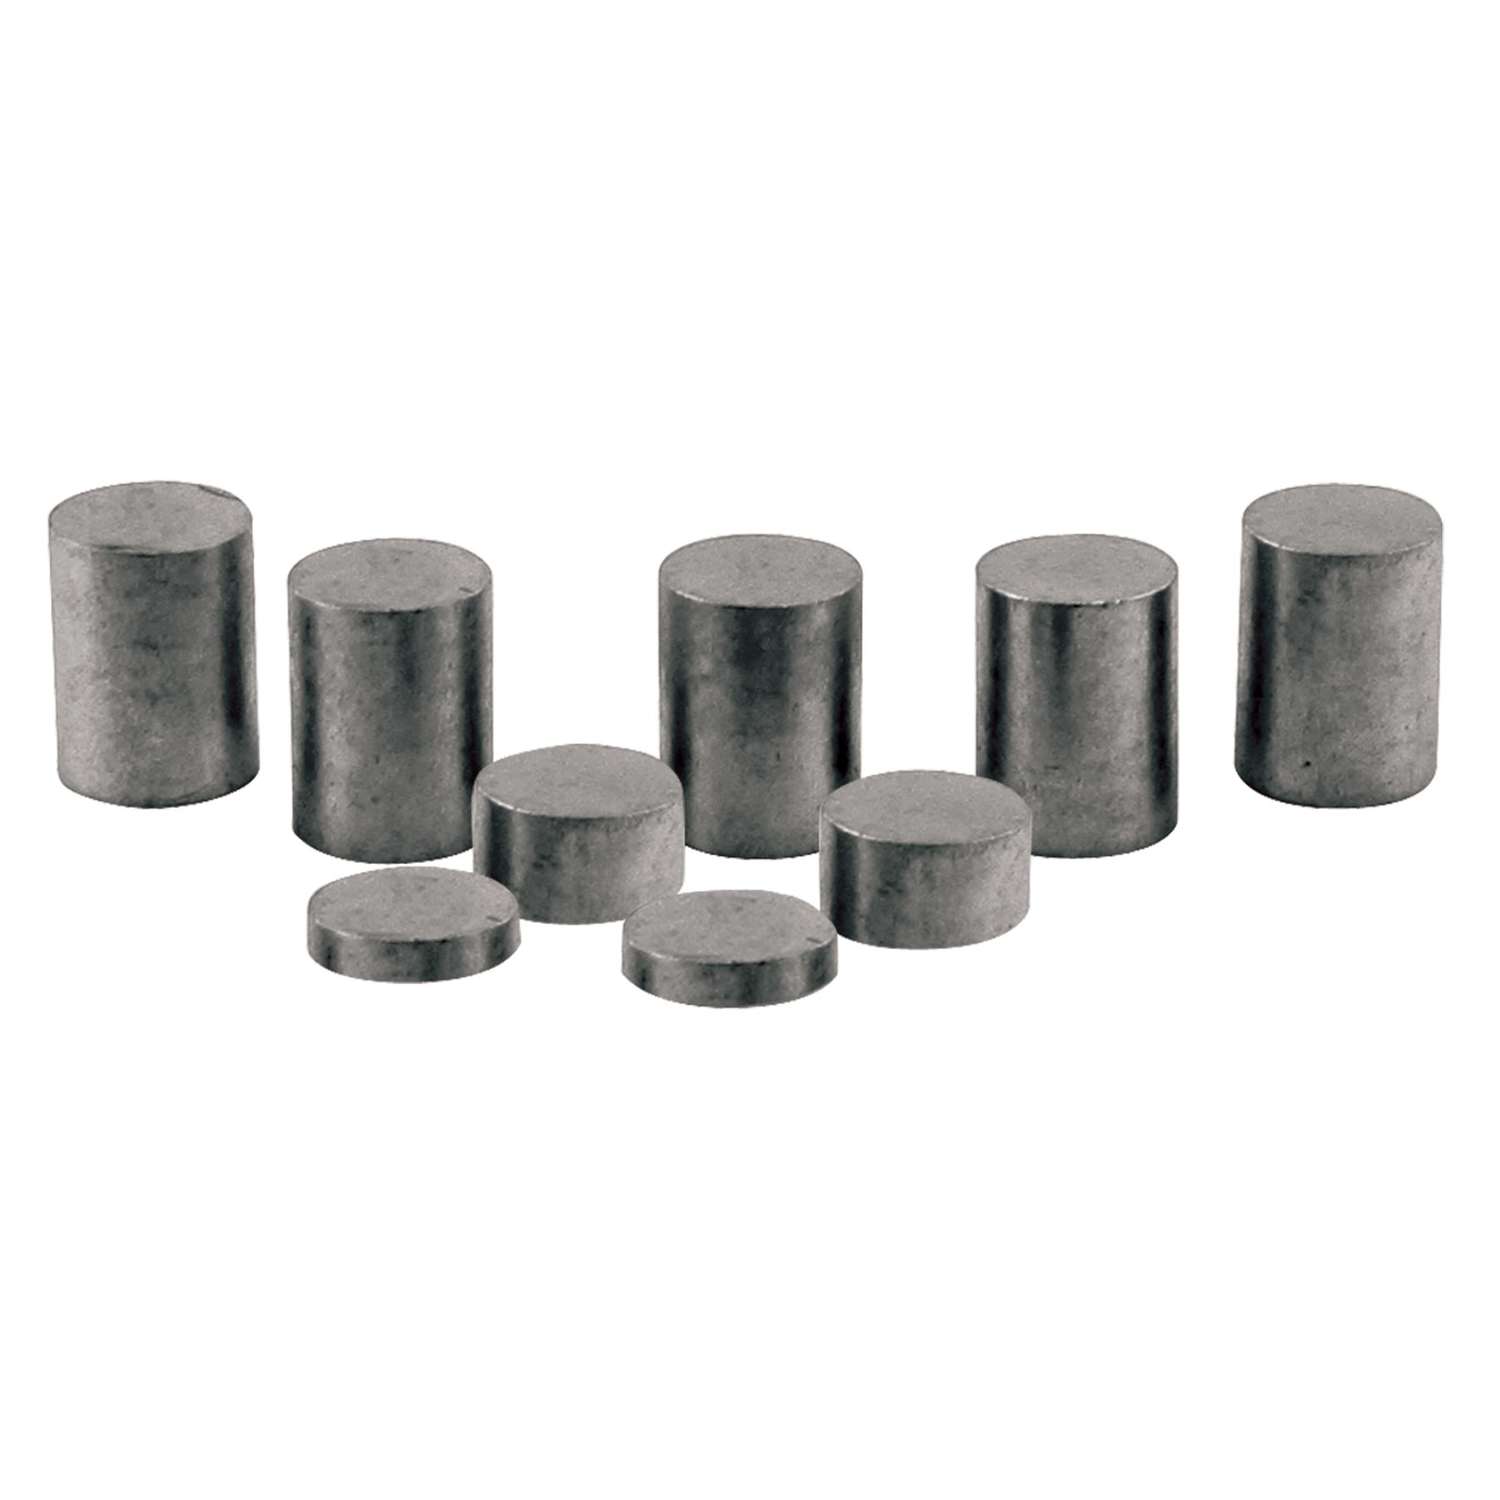 PineCar Tungsten Incremental Weights Silver 9 pc - Ace Hardware